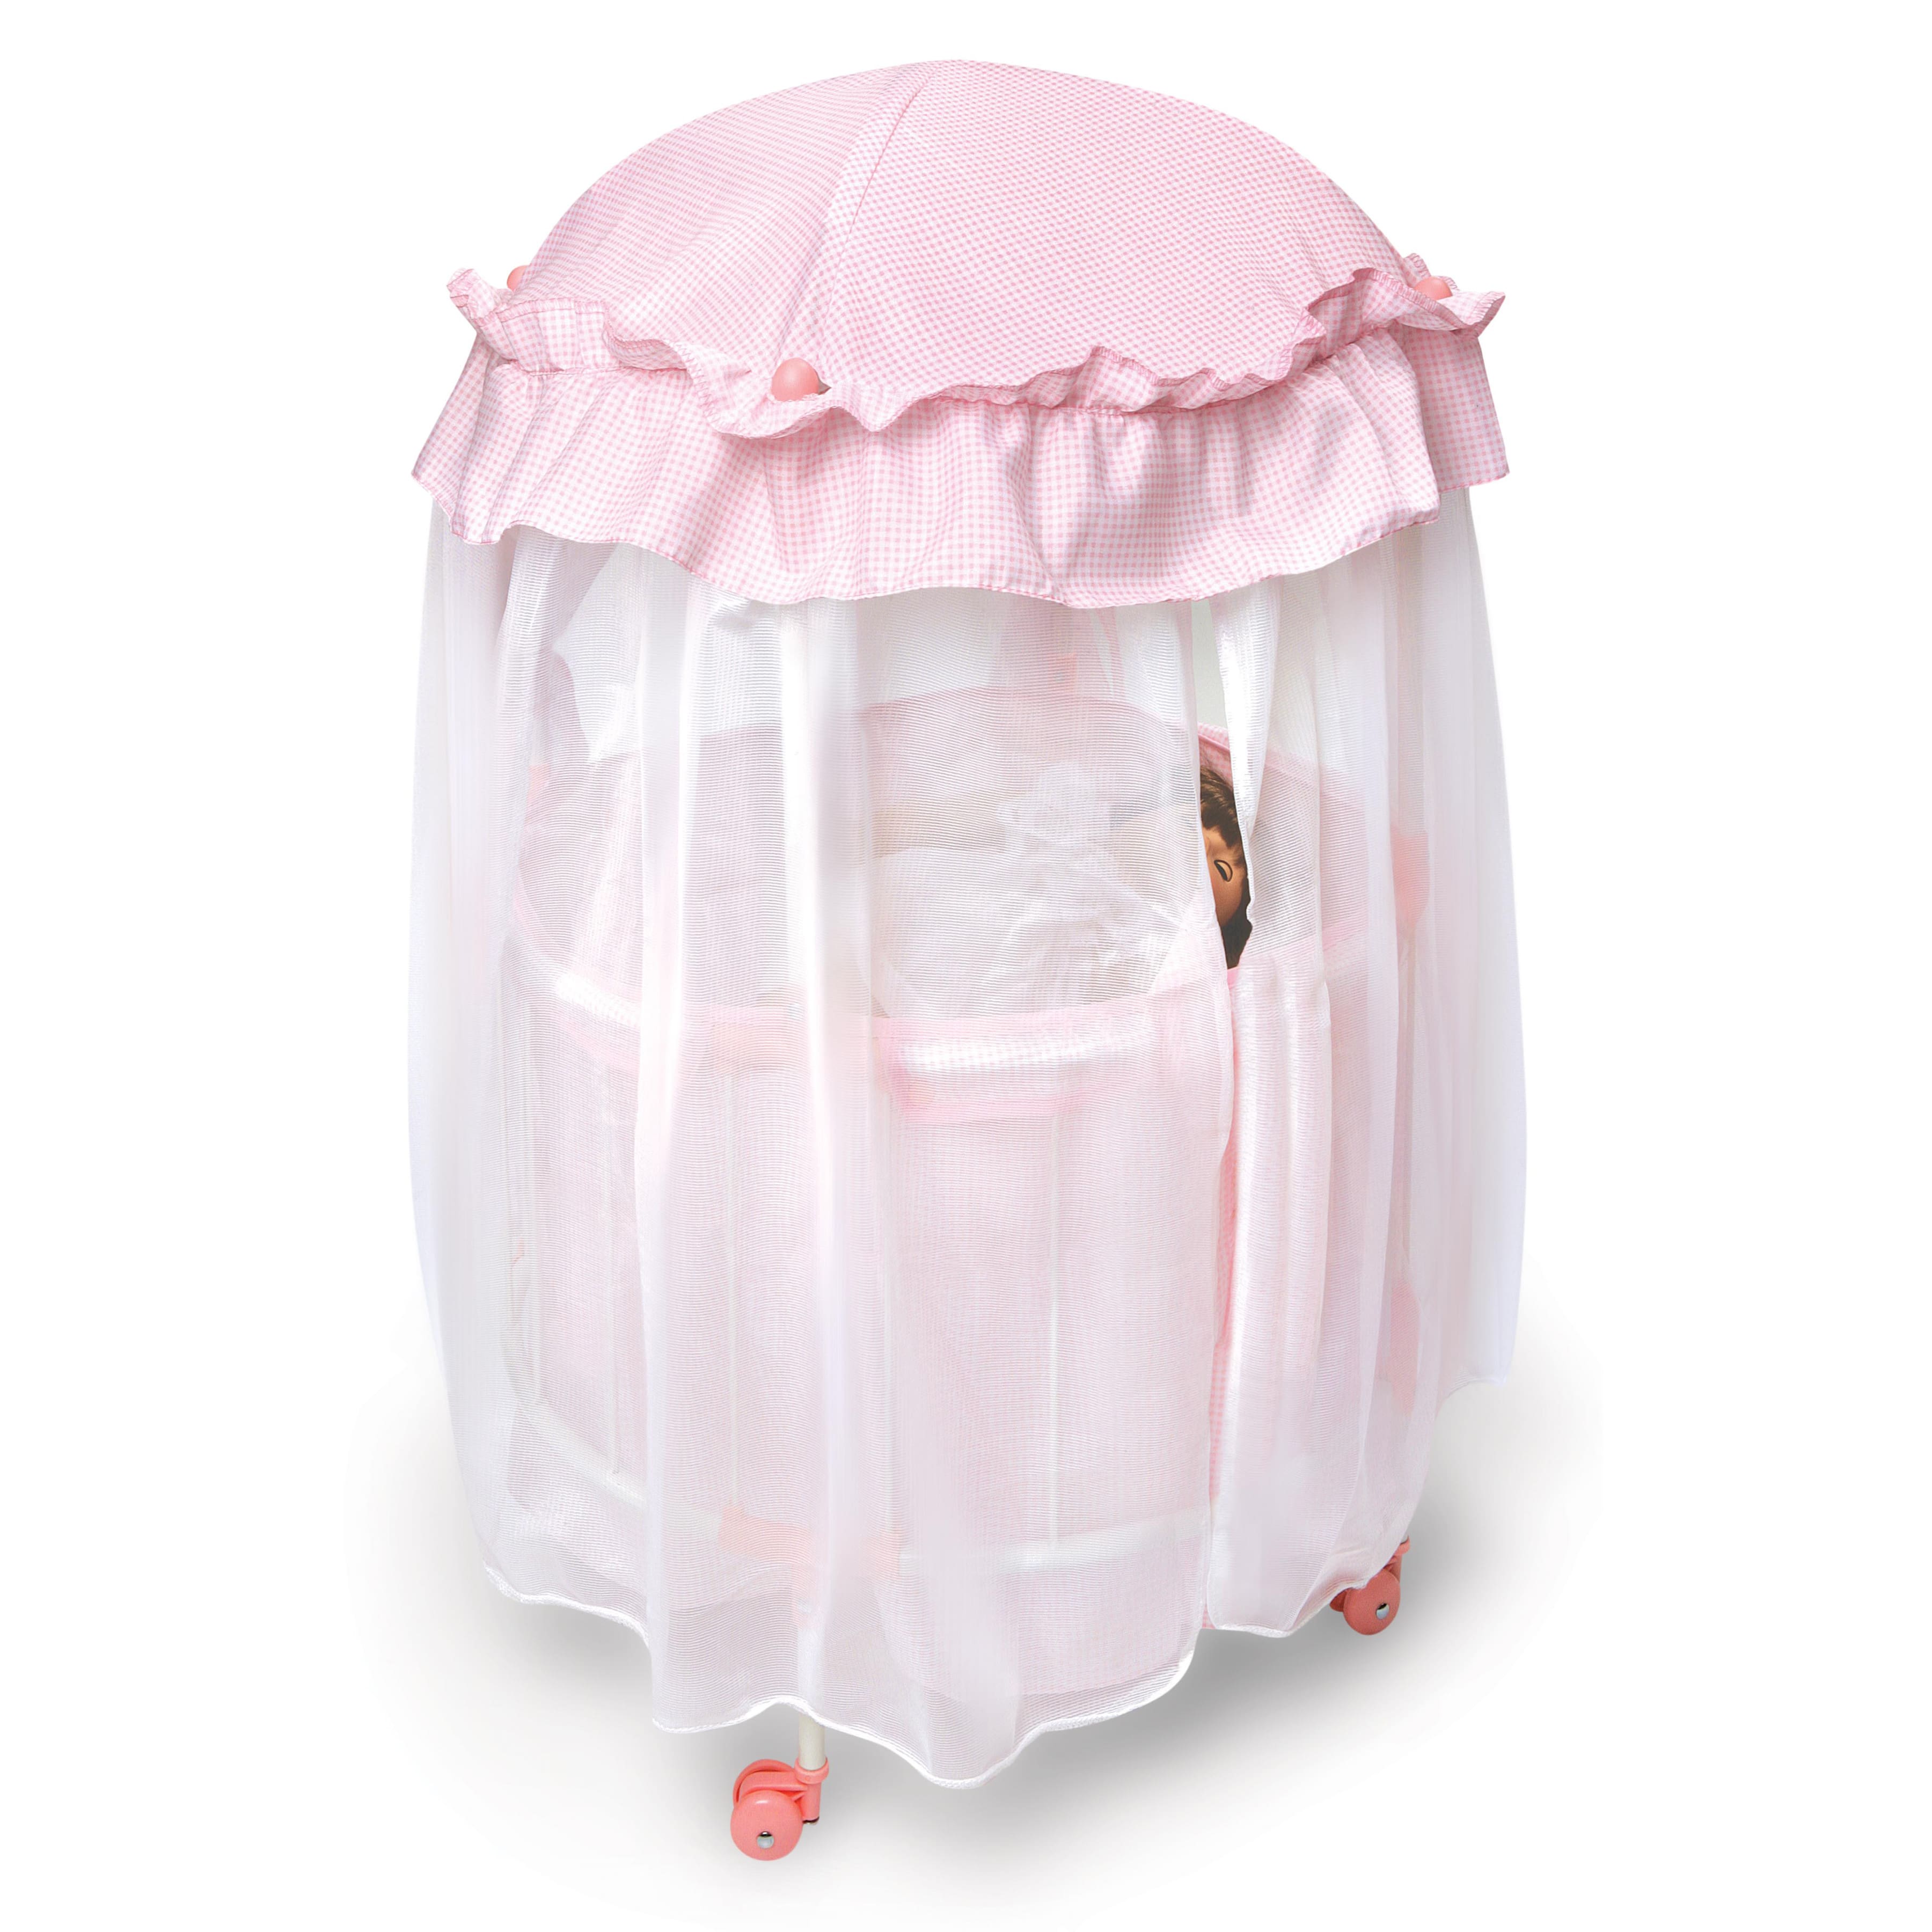 Badger Basket Pink &#x26; White Royal Pavilion Round Doll Crib with Canopy &#x26; Bedding